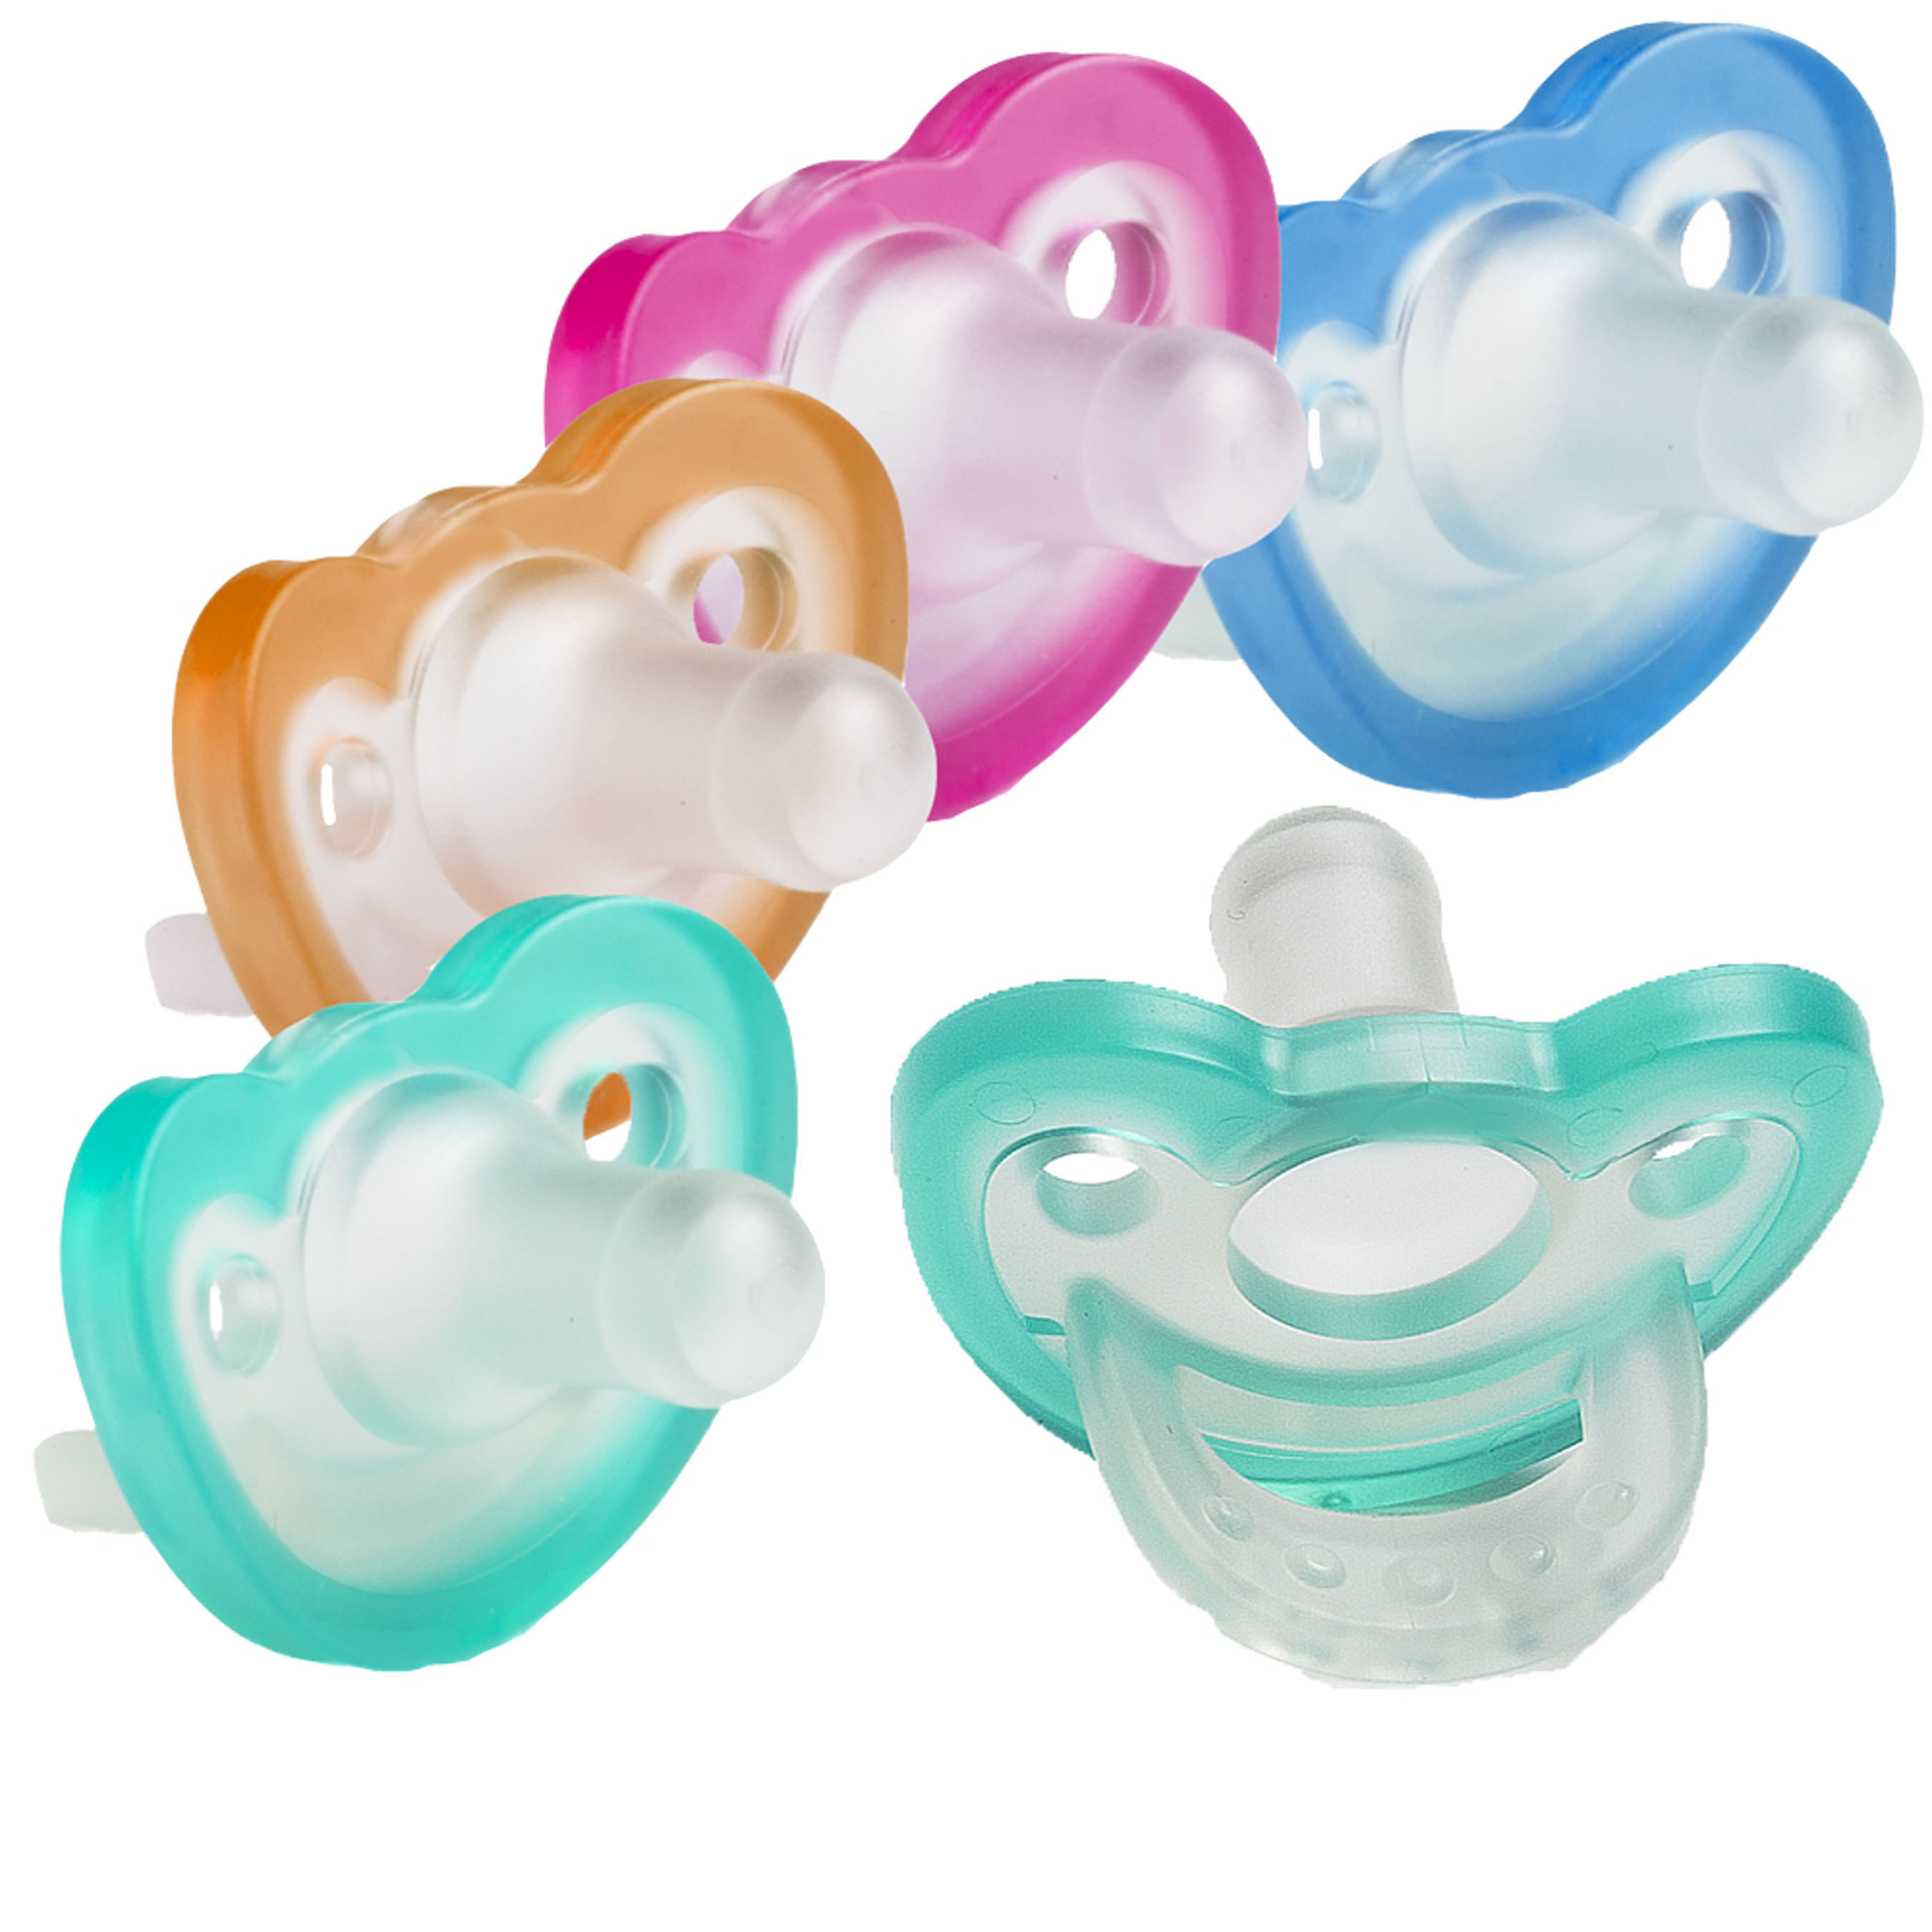 The new line of JollyPop(R) pacifiers are now available to hospitals through NOVAPLUS, the highly successful private-label brand of Novation. (PRNewsFoto/Novation, Sandbox Medical LLC) (PRNewsFoto/NOVATION / SANDBOX MEDICAL LLC)